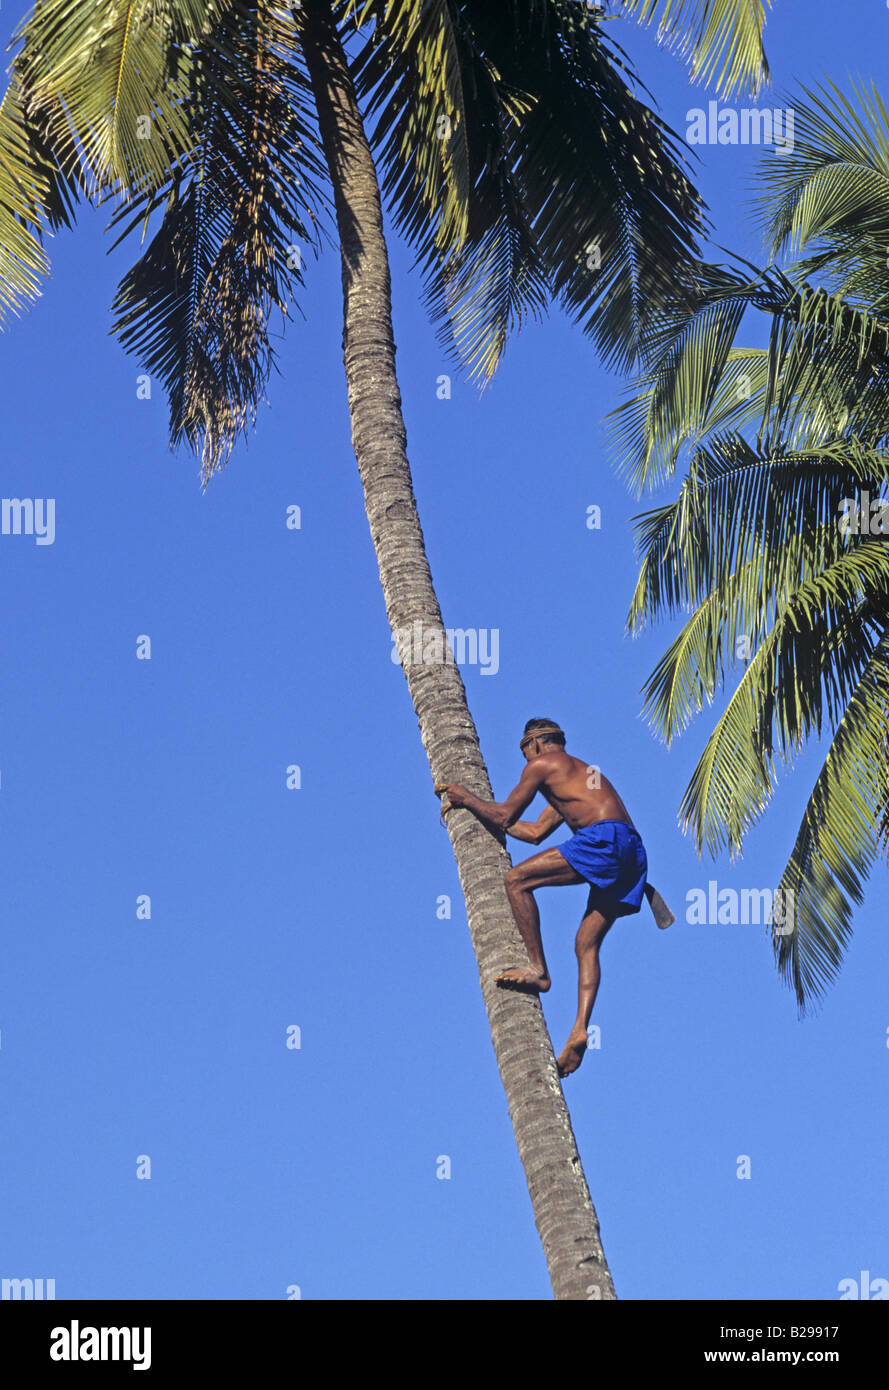 Coconut picker Goa State India Date 15 06 2008 Ref ZB548 115573 0060 COMPULSORY CREDIT World Pictures Photoshot Stock Photo